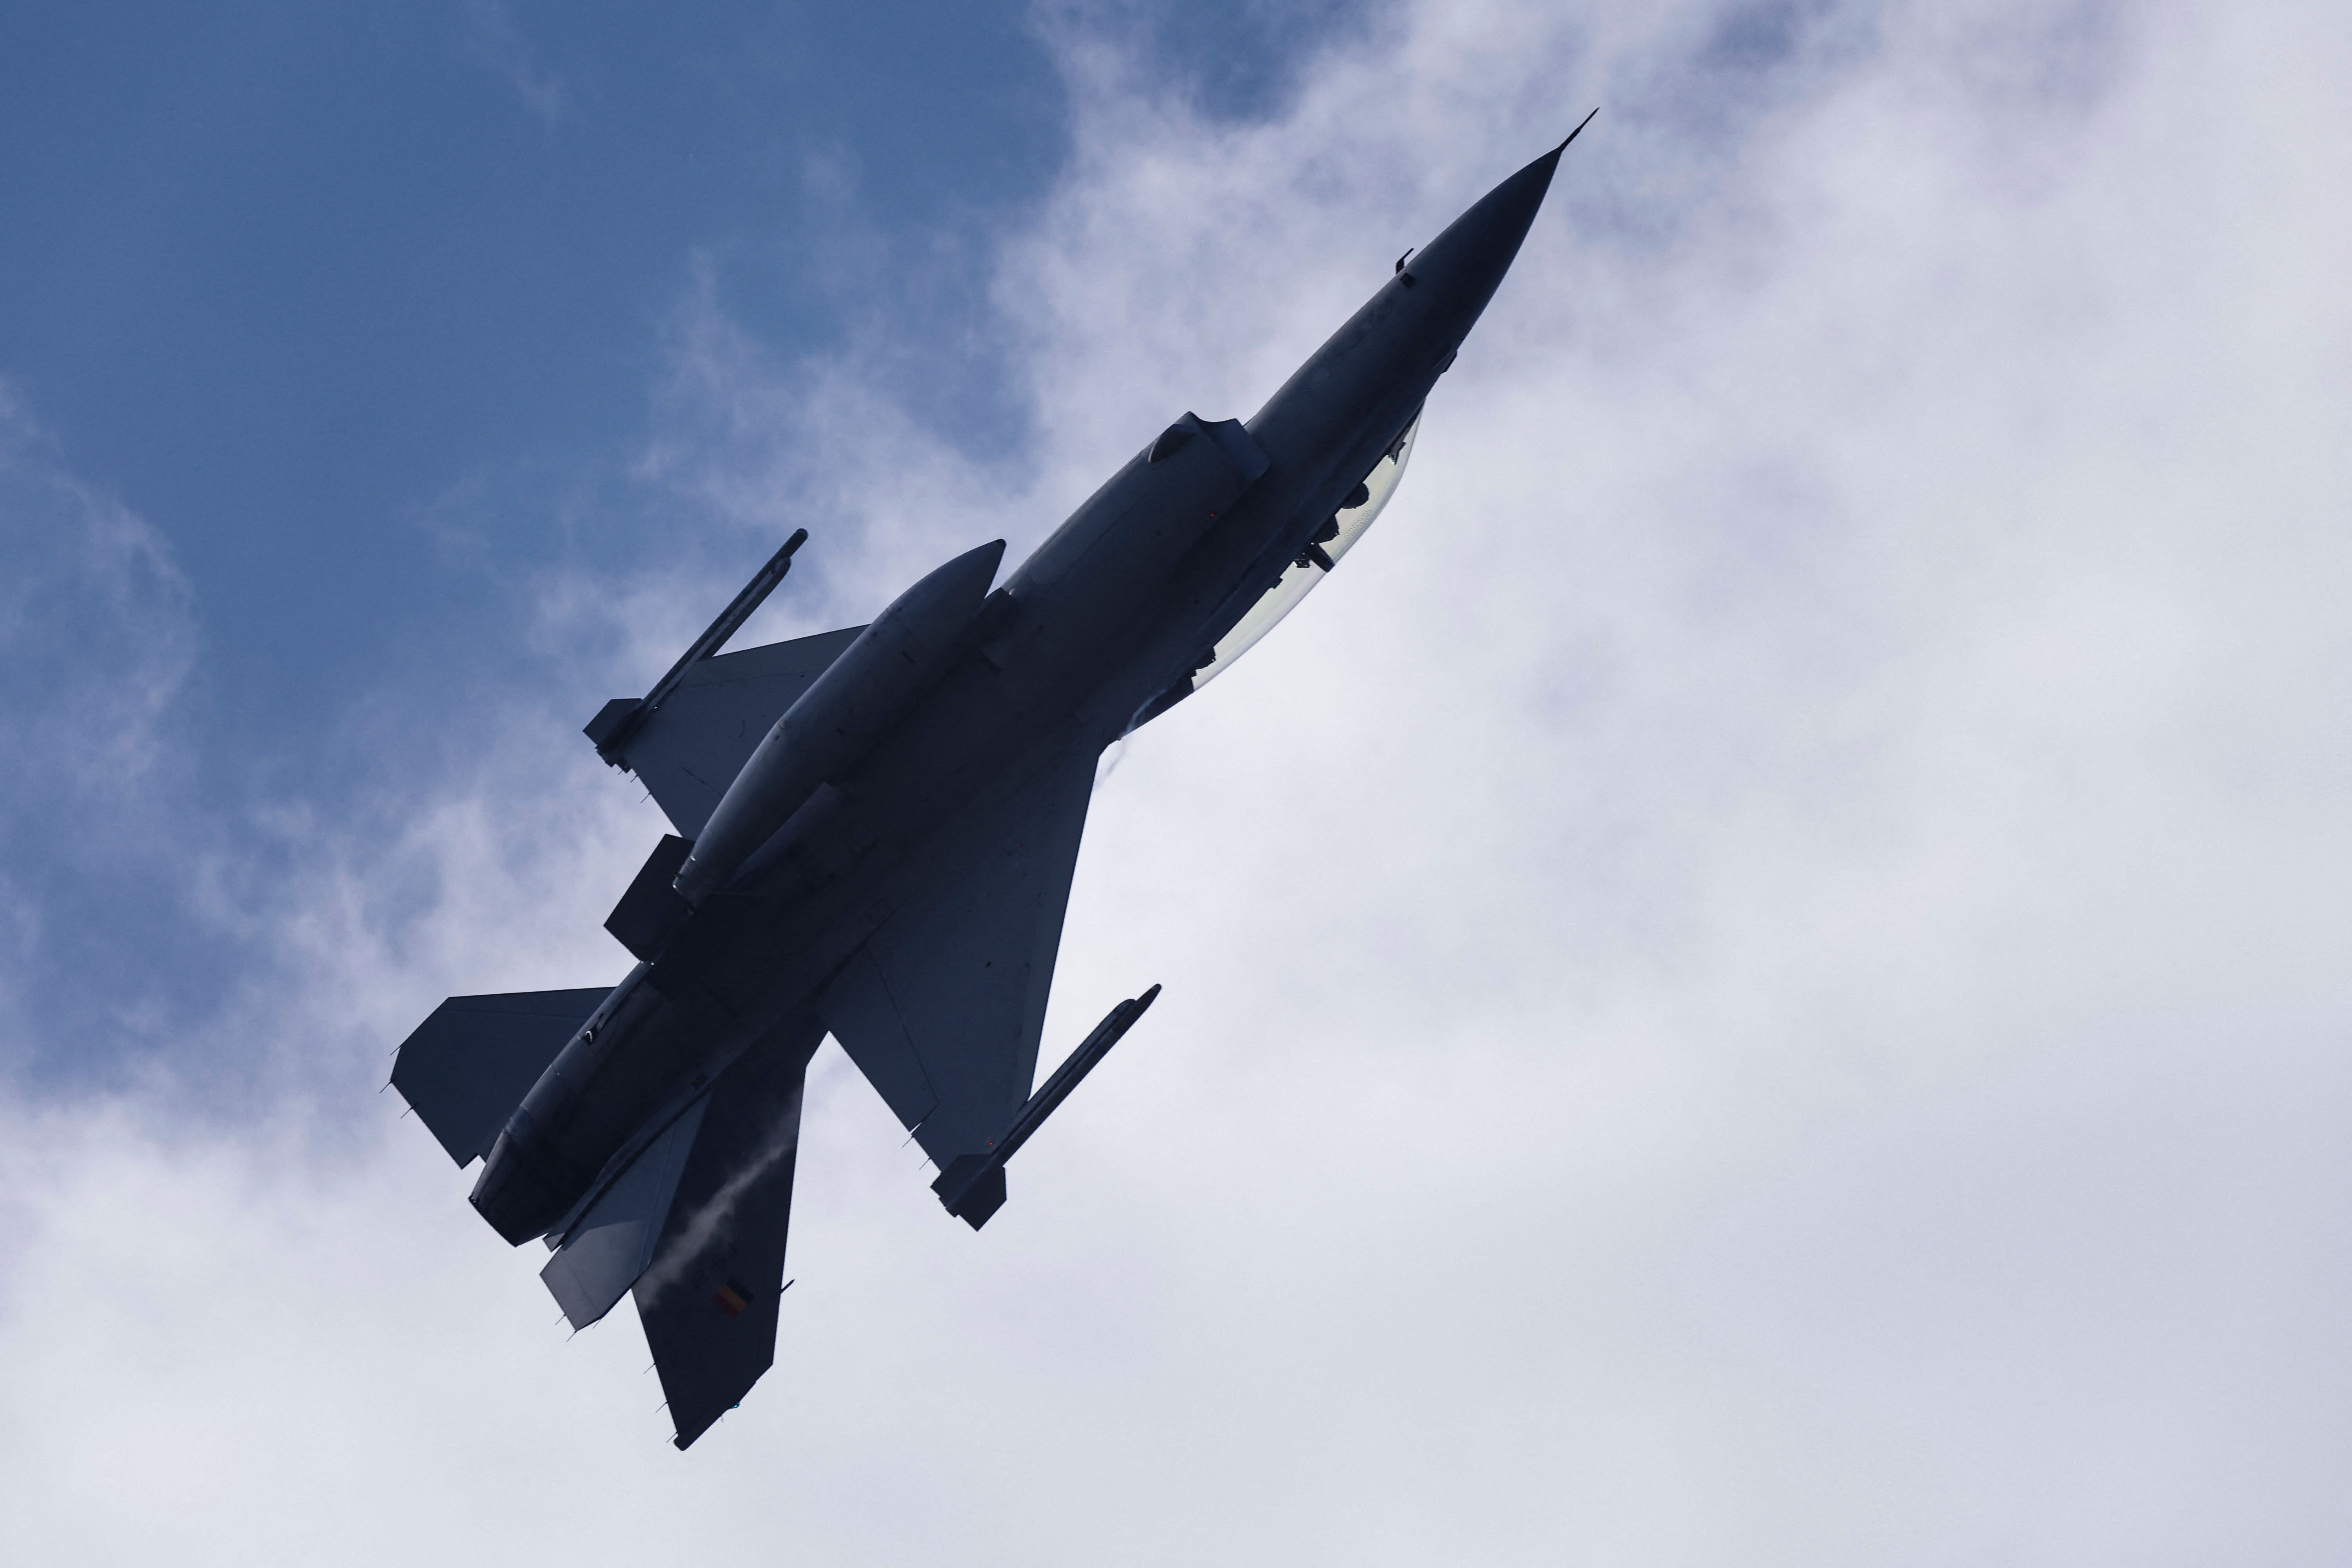 Ukraine Aims For F-16 Fighter Jets After Winning Battle For Tanks